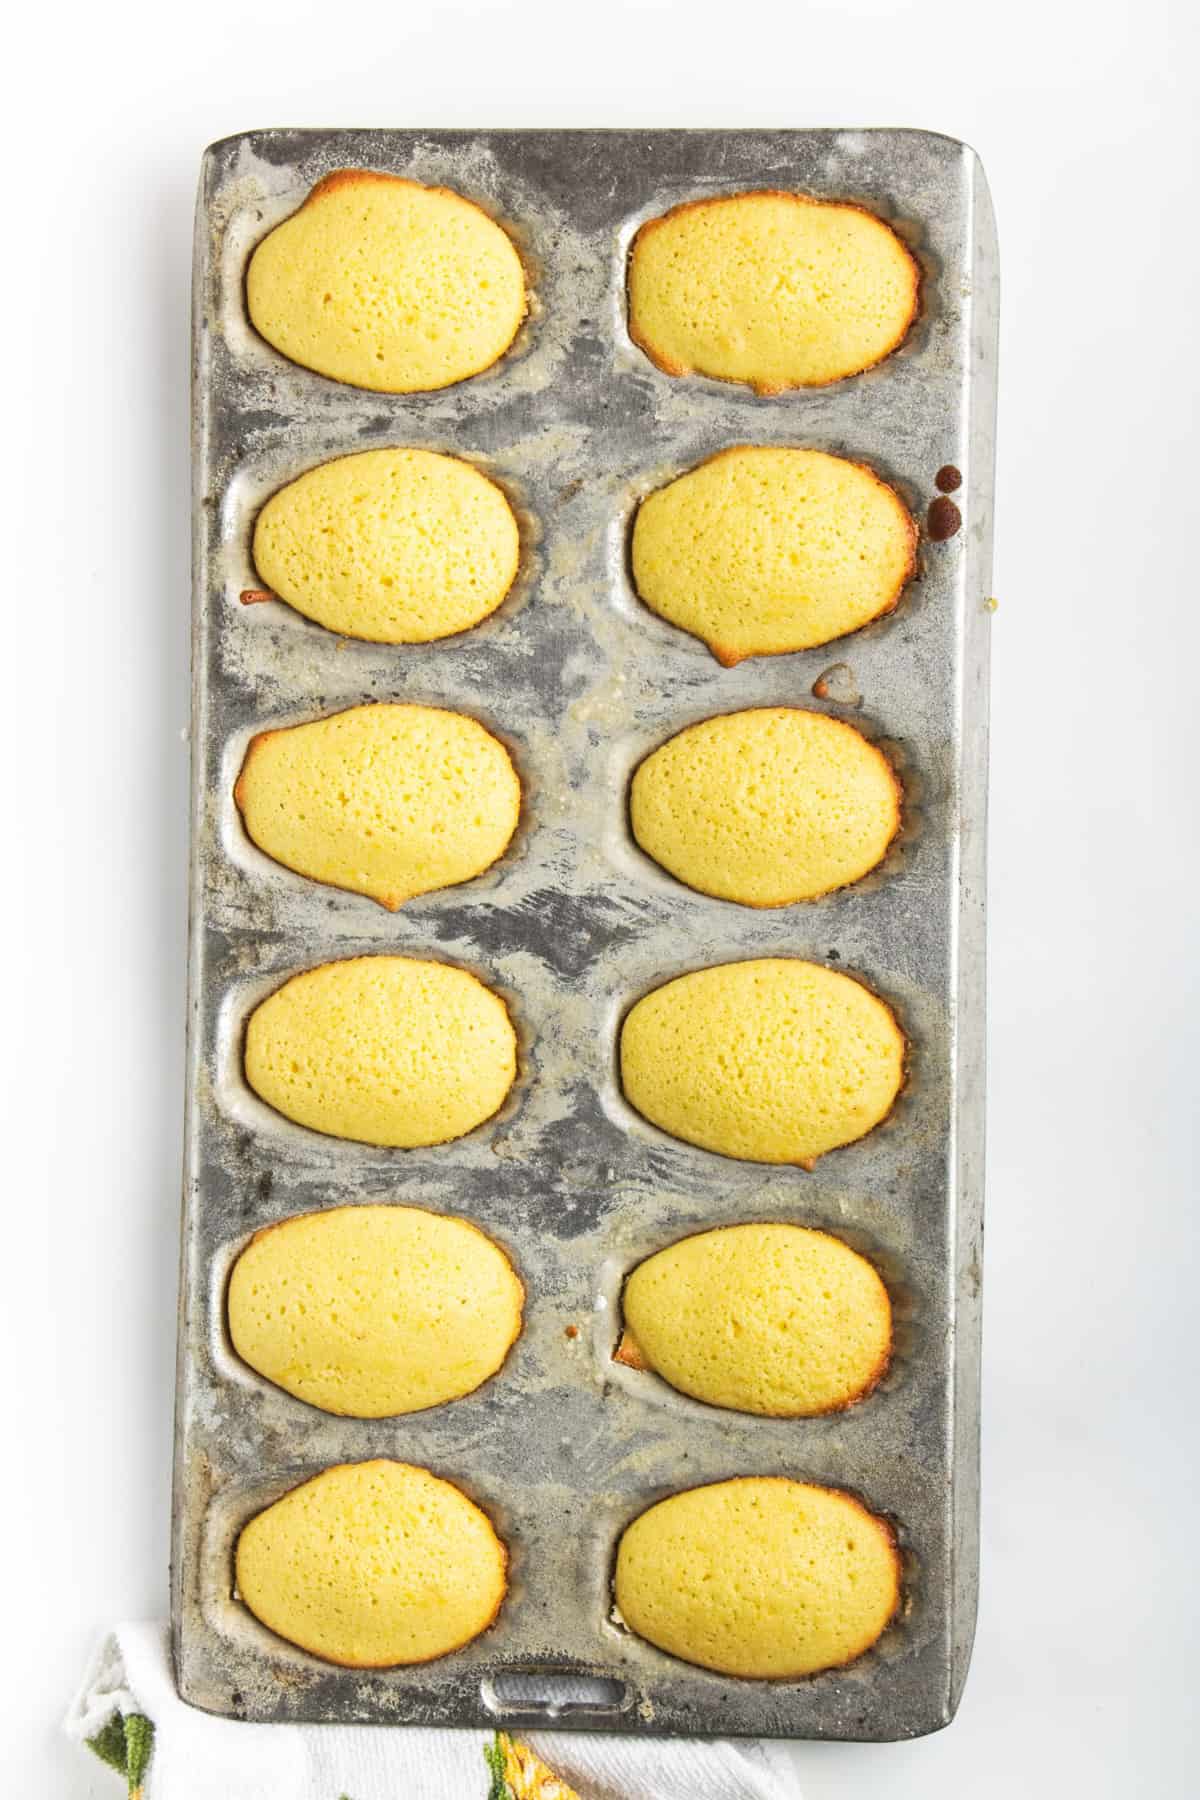 Baked madeleines in a pan.